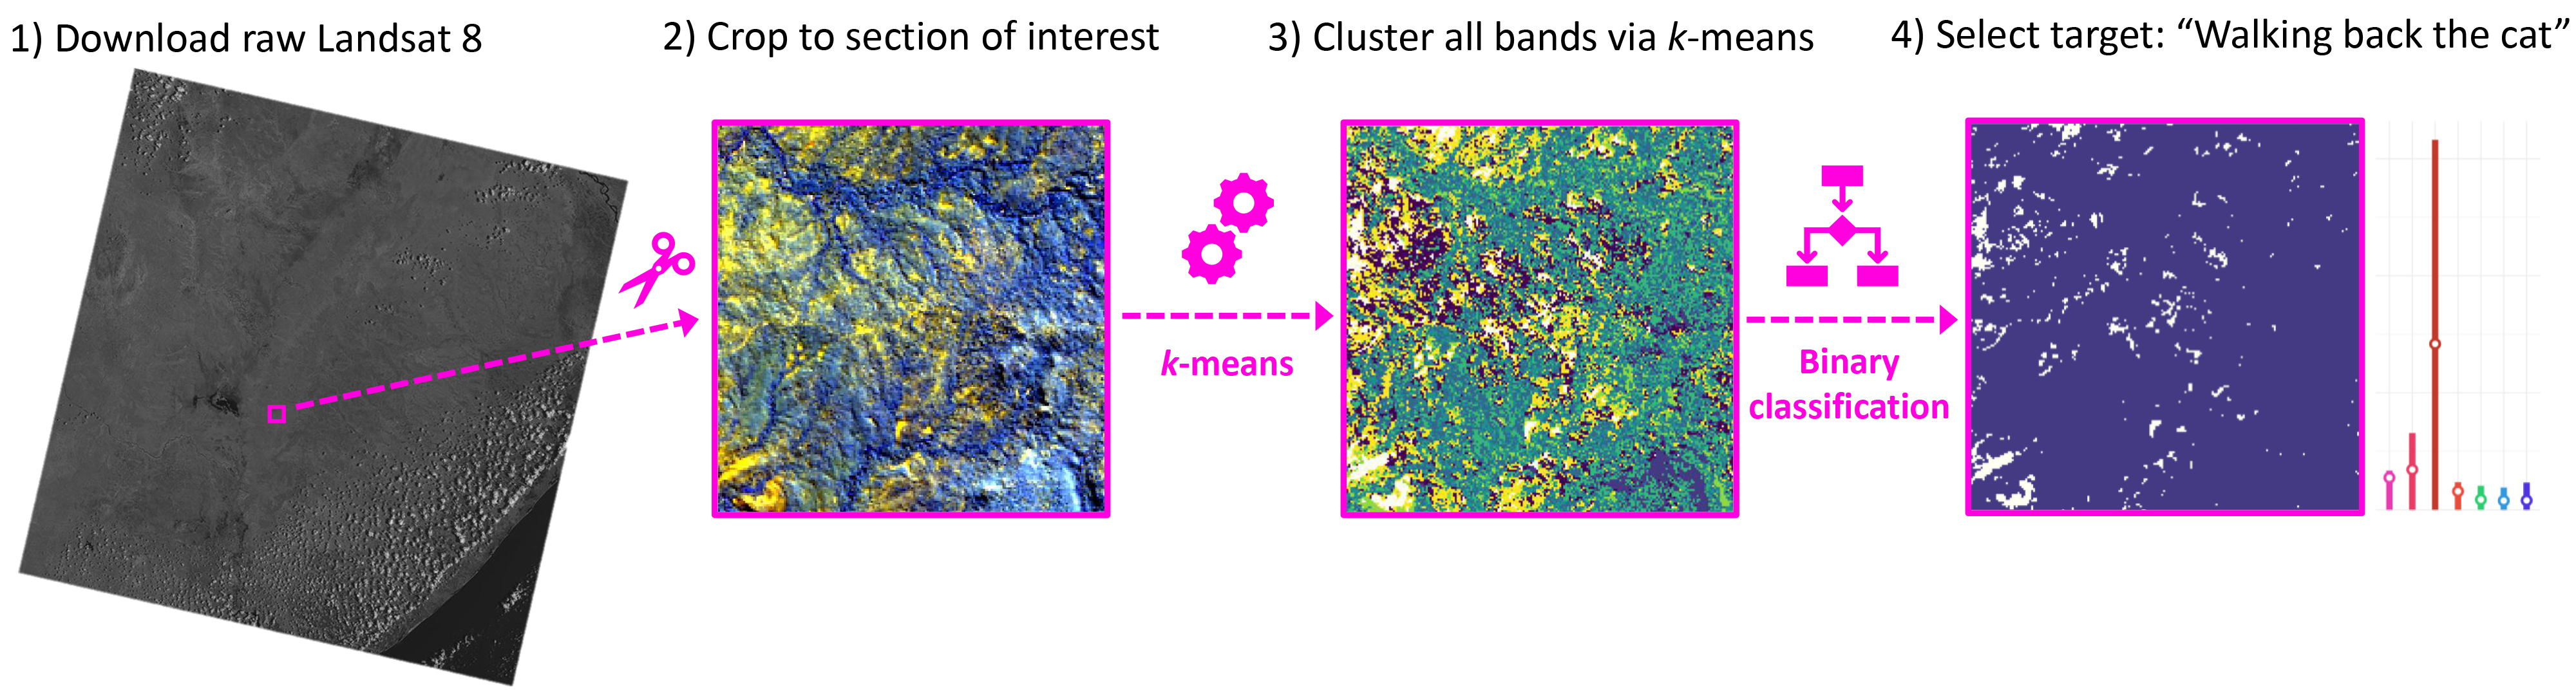 (1) Example of one of the seven spectral bands satellite images used in this study; (2) false colour map based on the infrared bands, after cropping to study area; (3) results of clustering using all seven spectral bands; (4) Binarize clusters for classification by selecting the cluster that contains most fossil sites as the target class (“walking back the cat”) versus all other clusters combined into a single class.